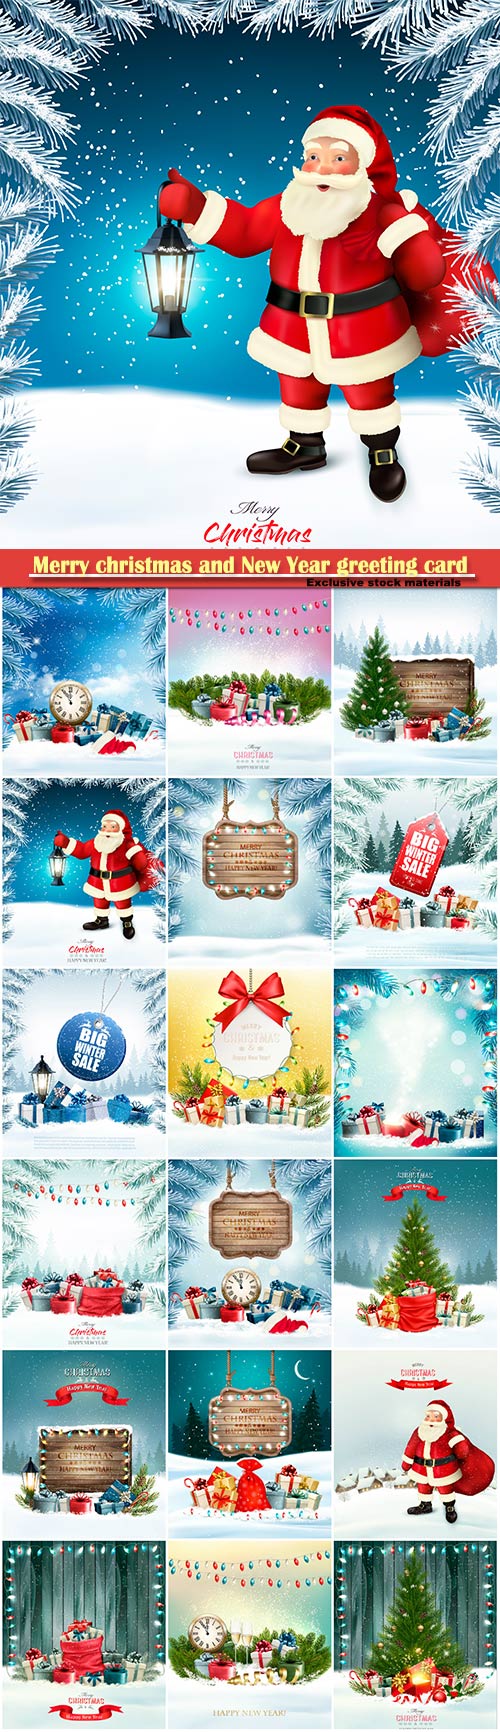 Merry christmas and New Year greeting card vector # 14